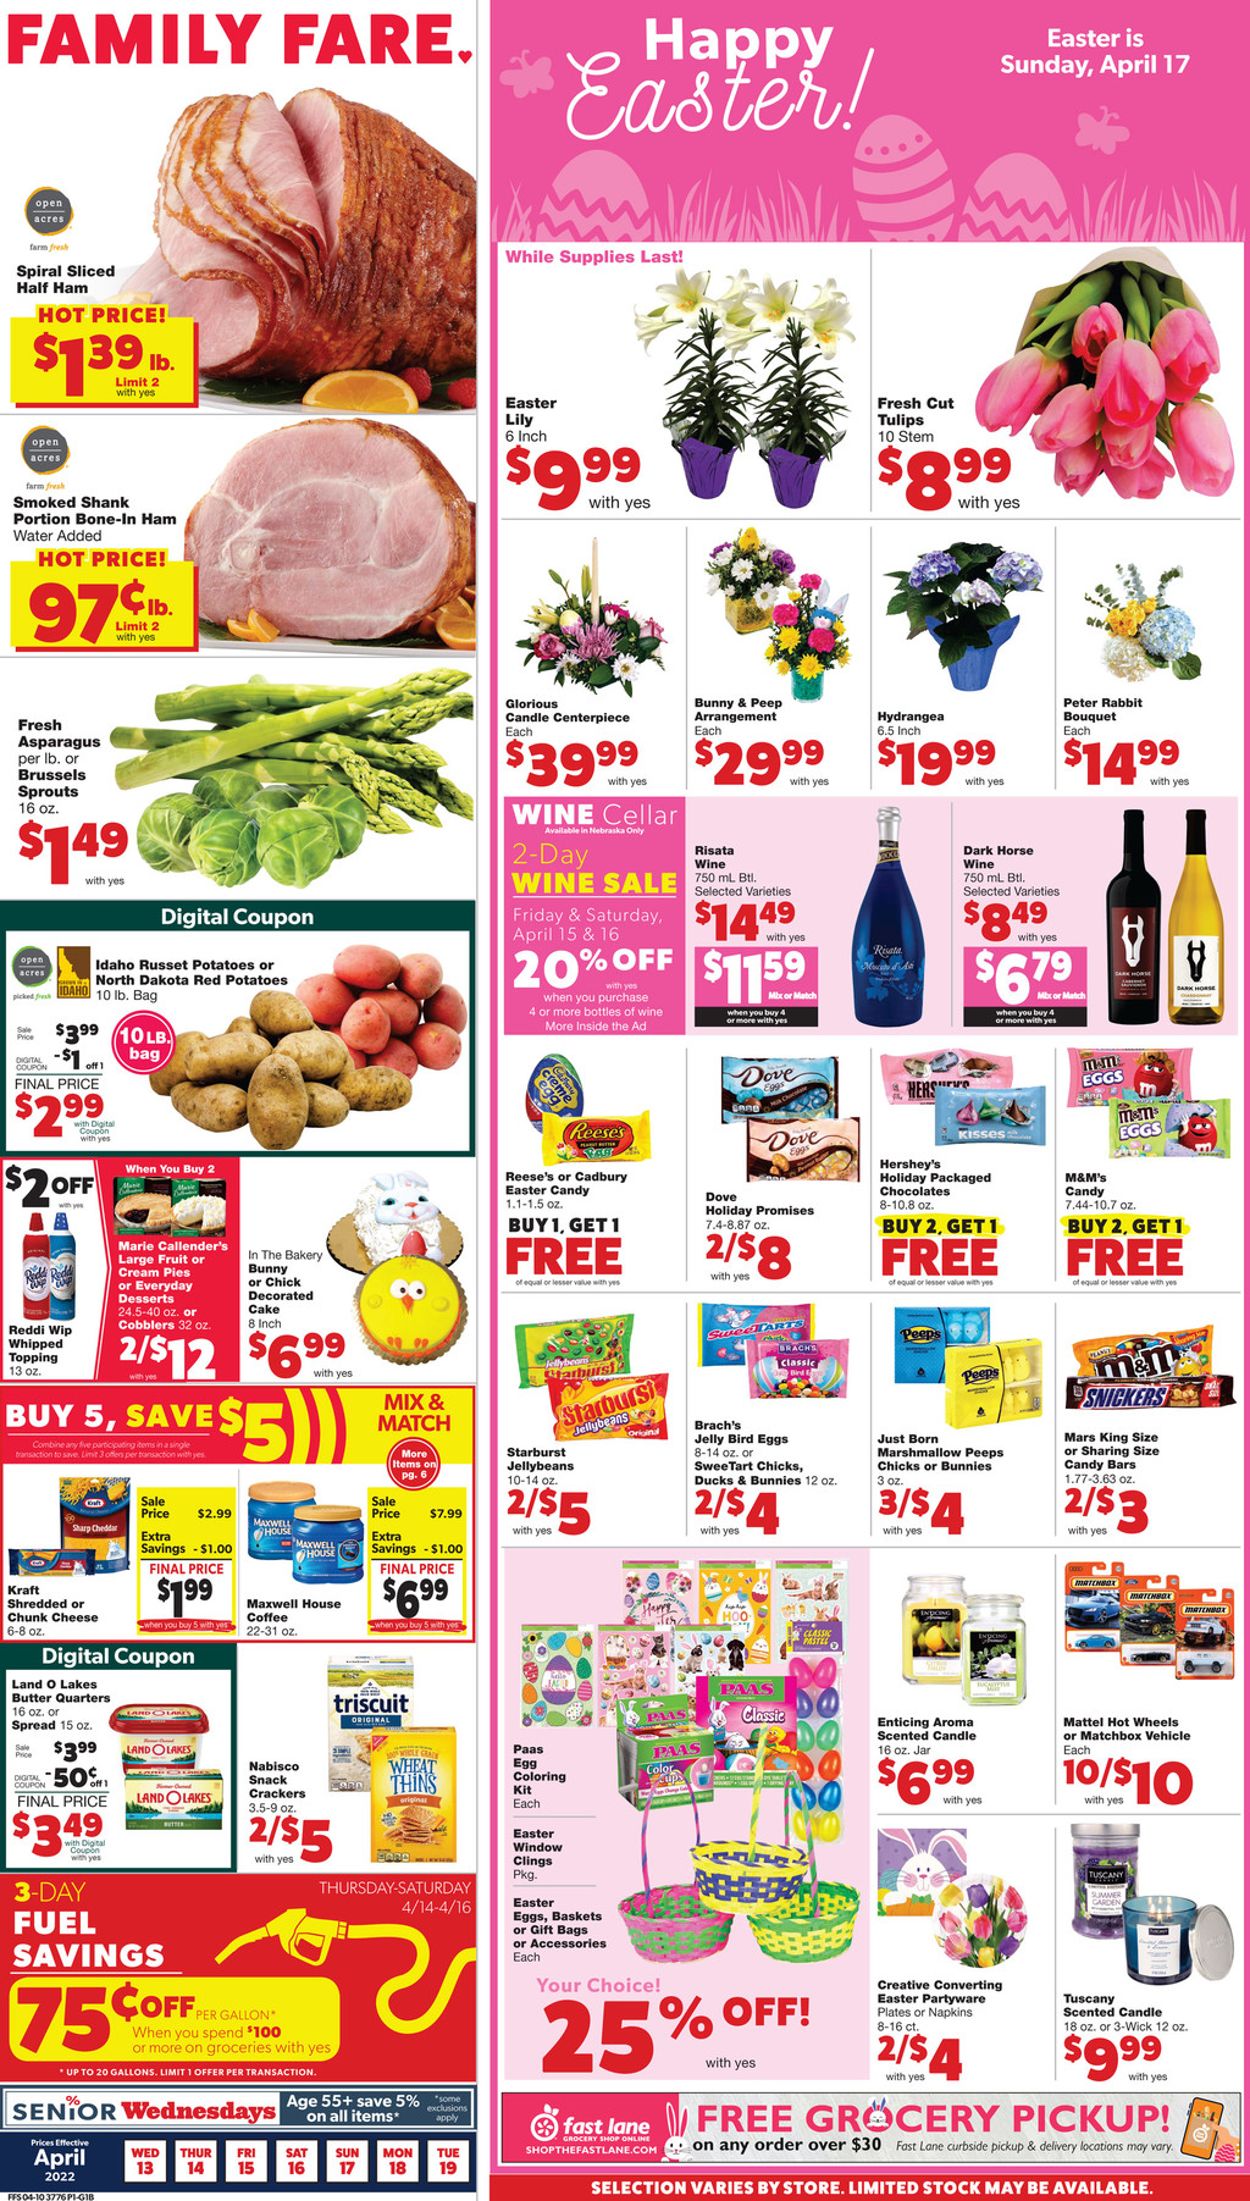 Family Fare EASTER 2022 Weekly Ad Circular - valid 04/13-04/19/2022